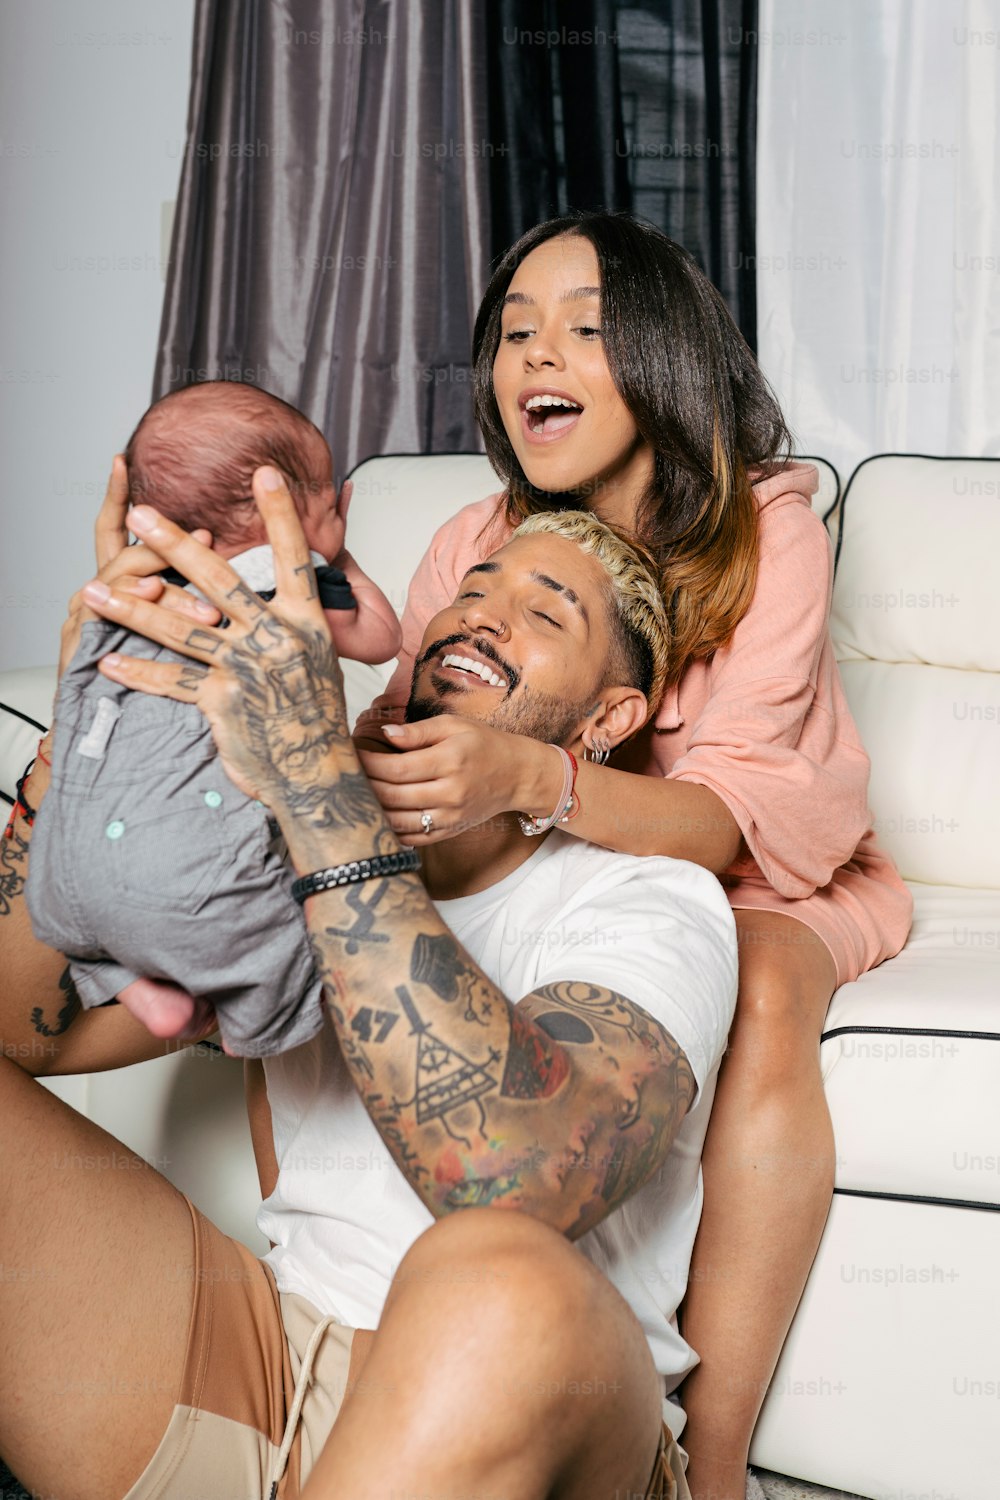 a man holding a baby and a woman sitting on a couch